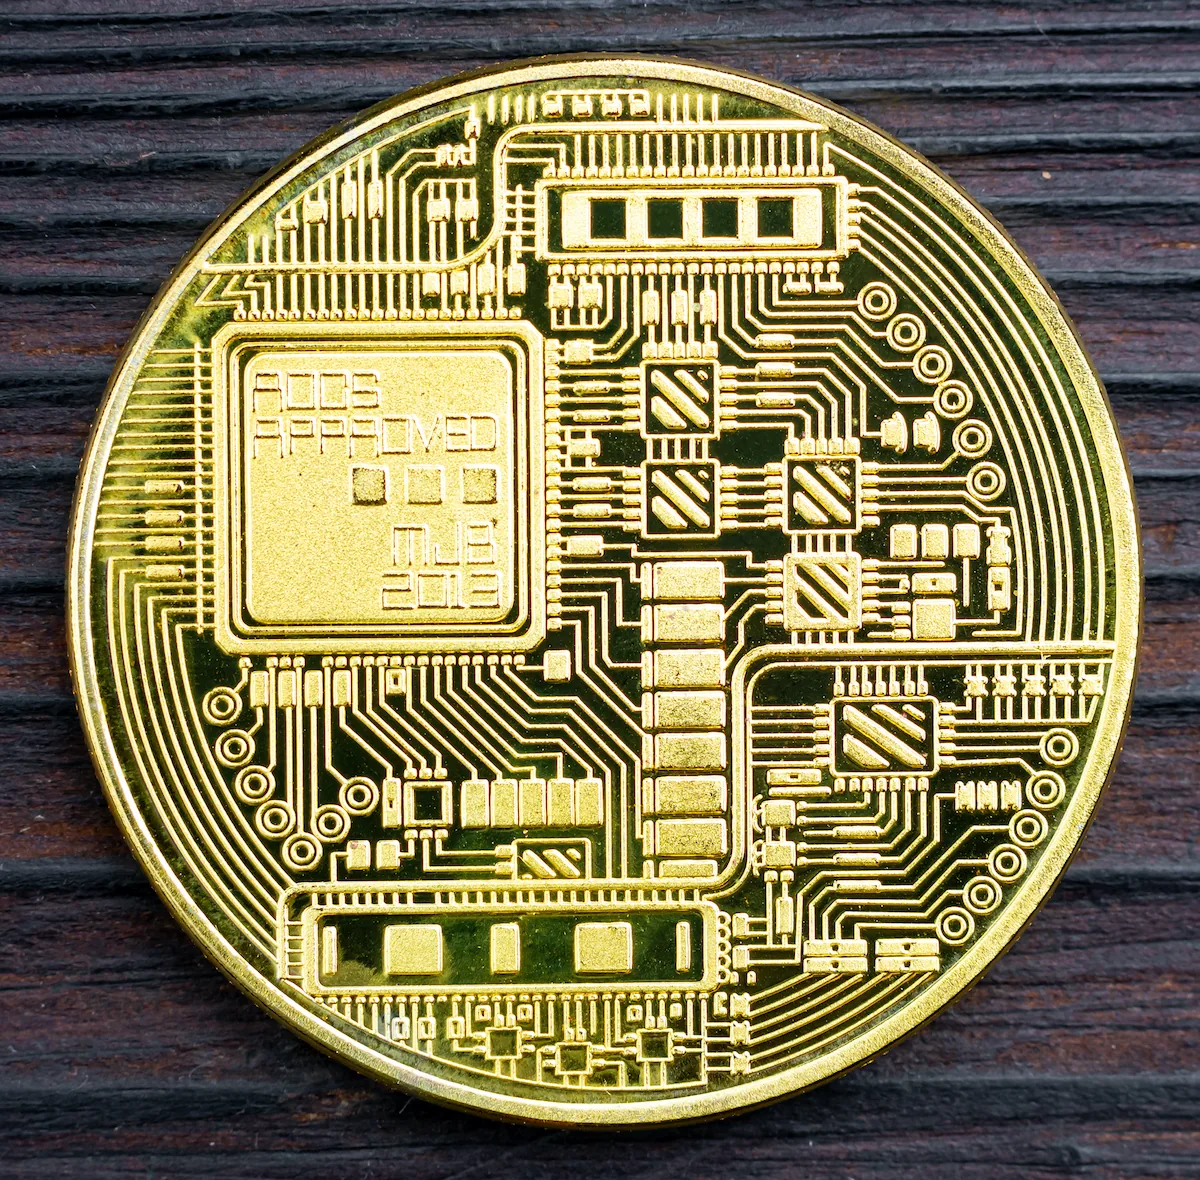 Gold coin with digital patterns